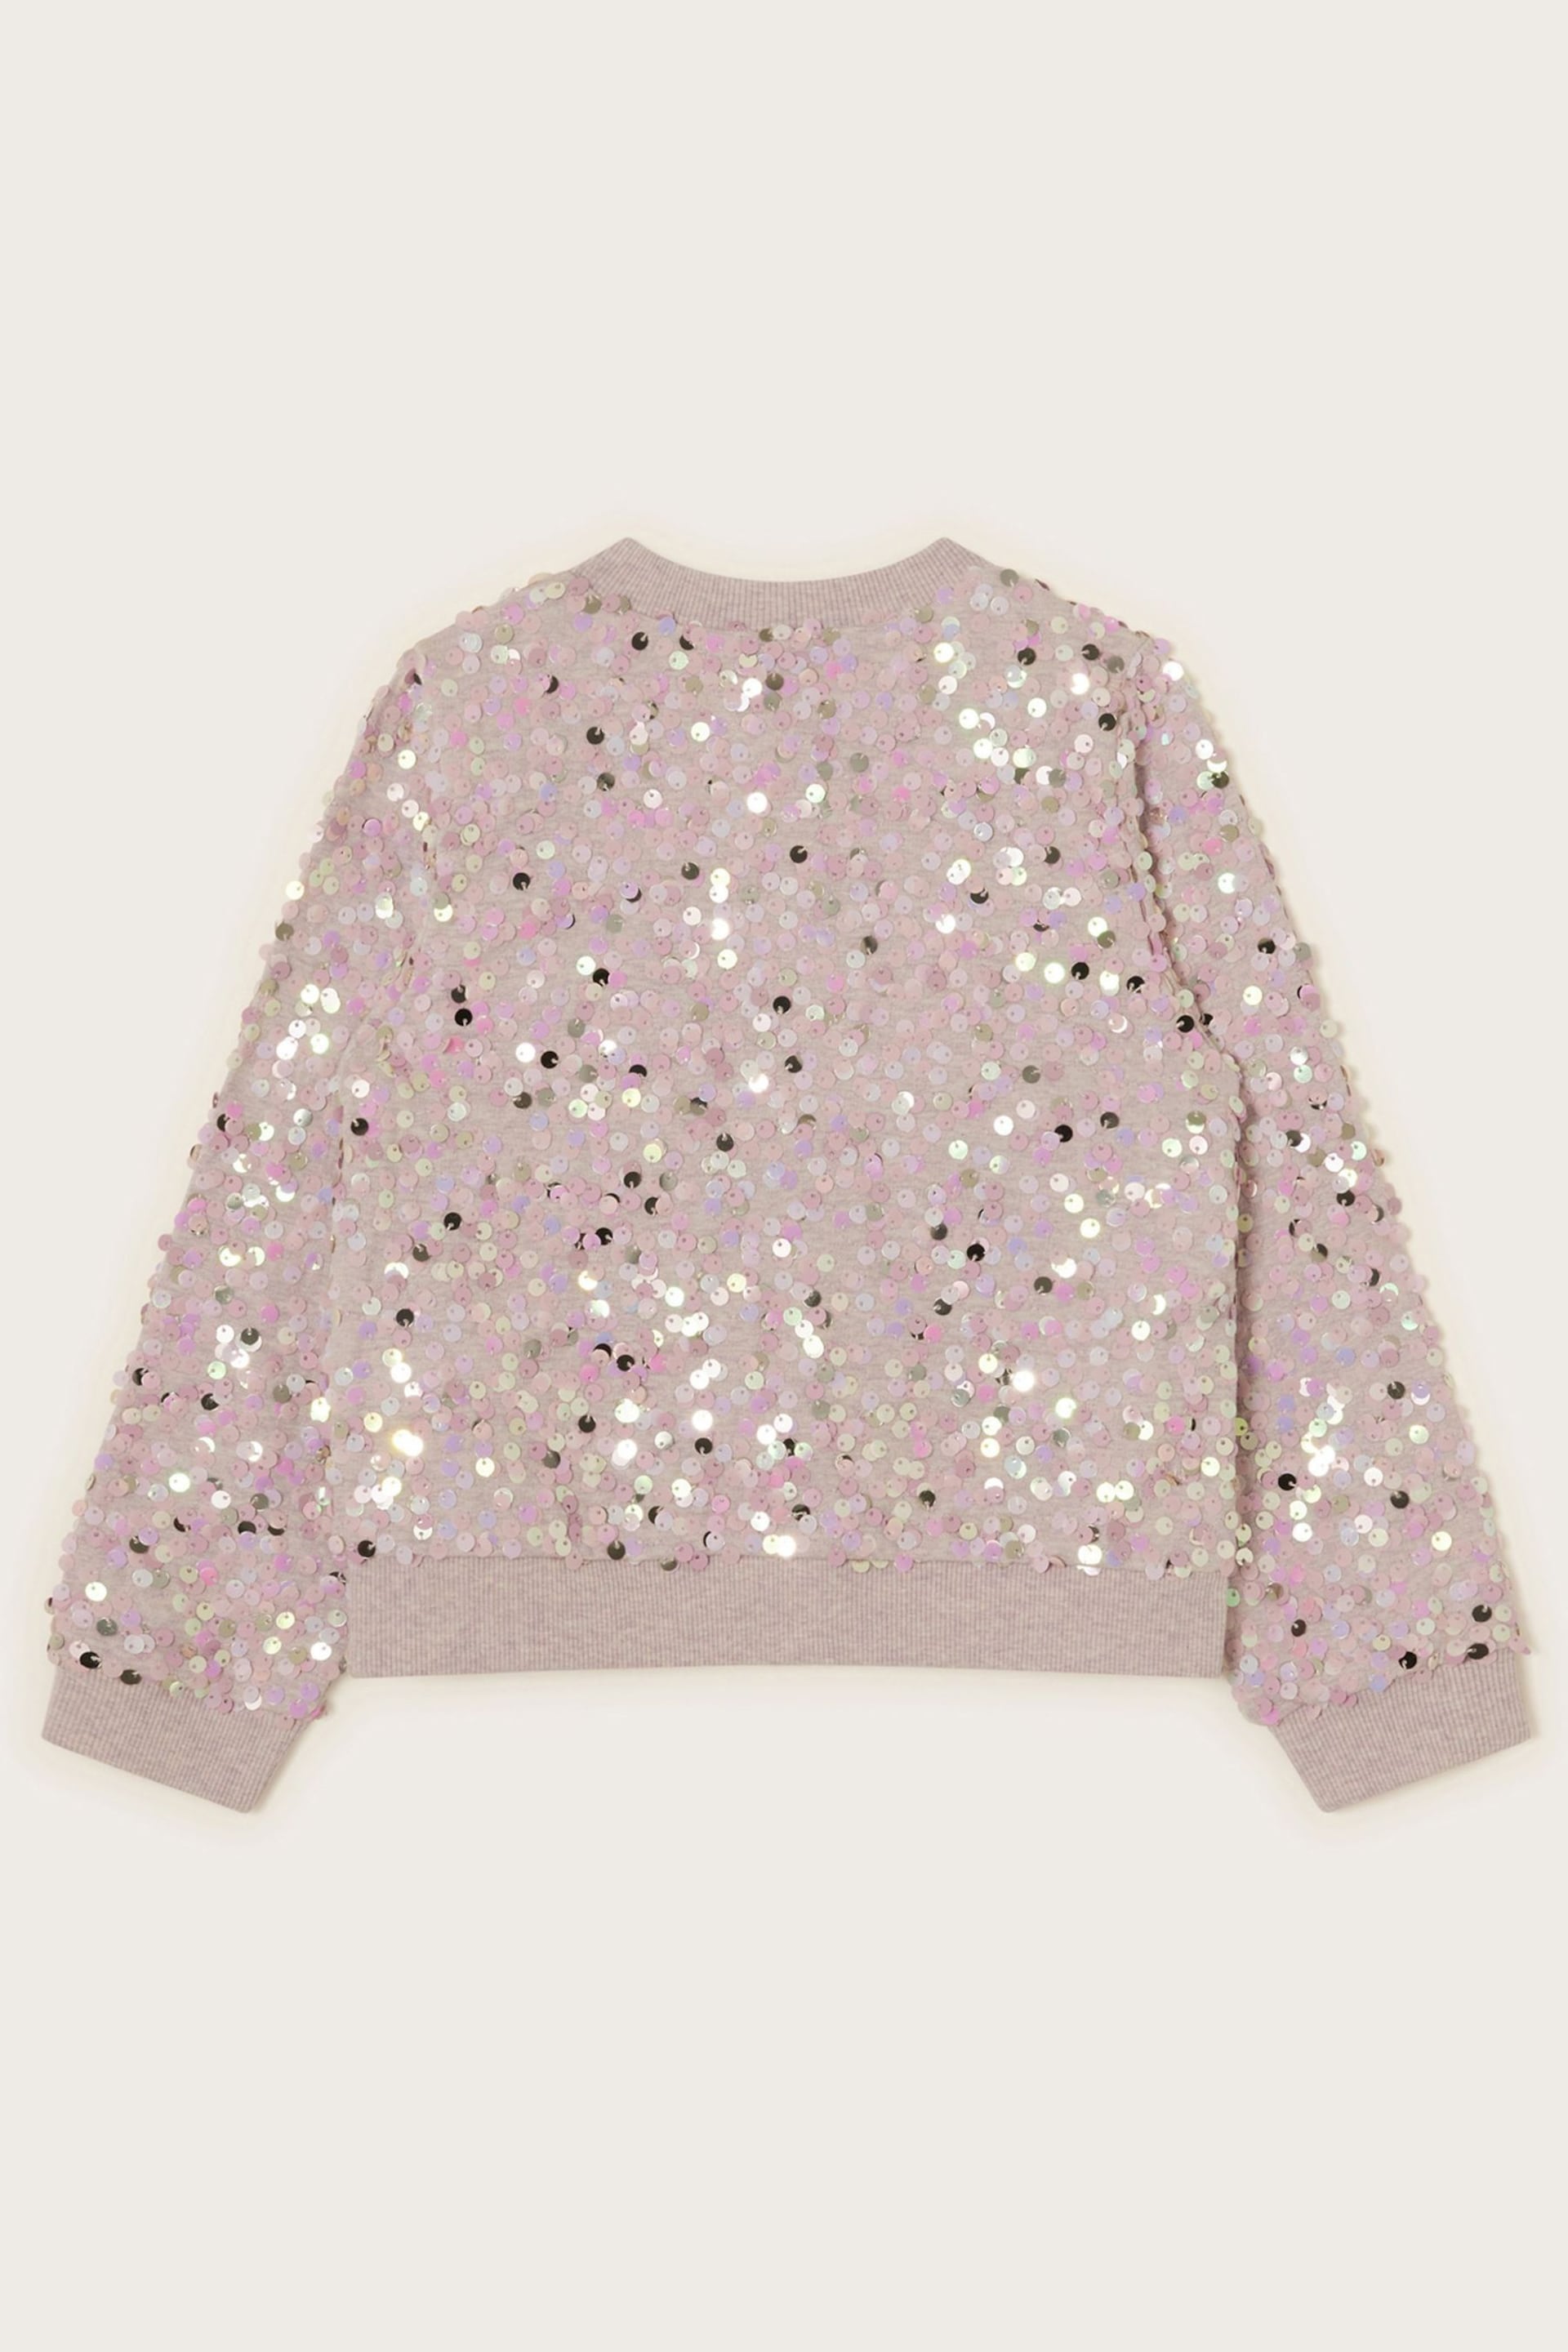 Monsoon Pink All-Over Sequin Bomber Jacket - Image 2 of 3